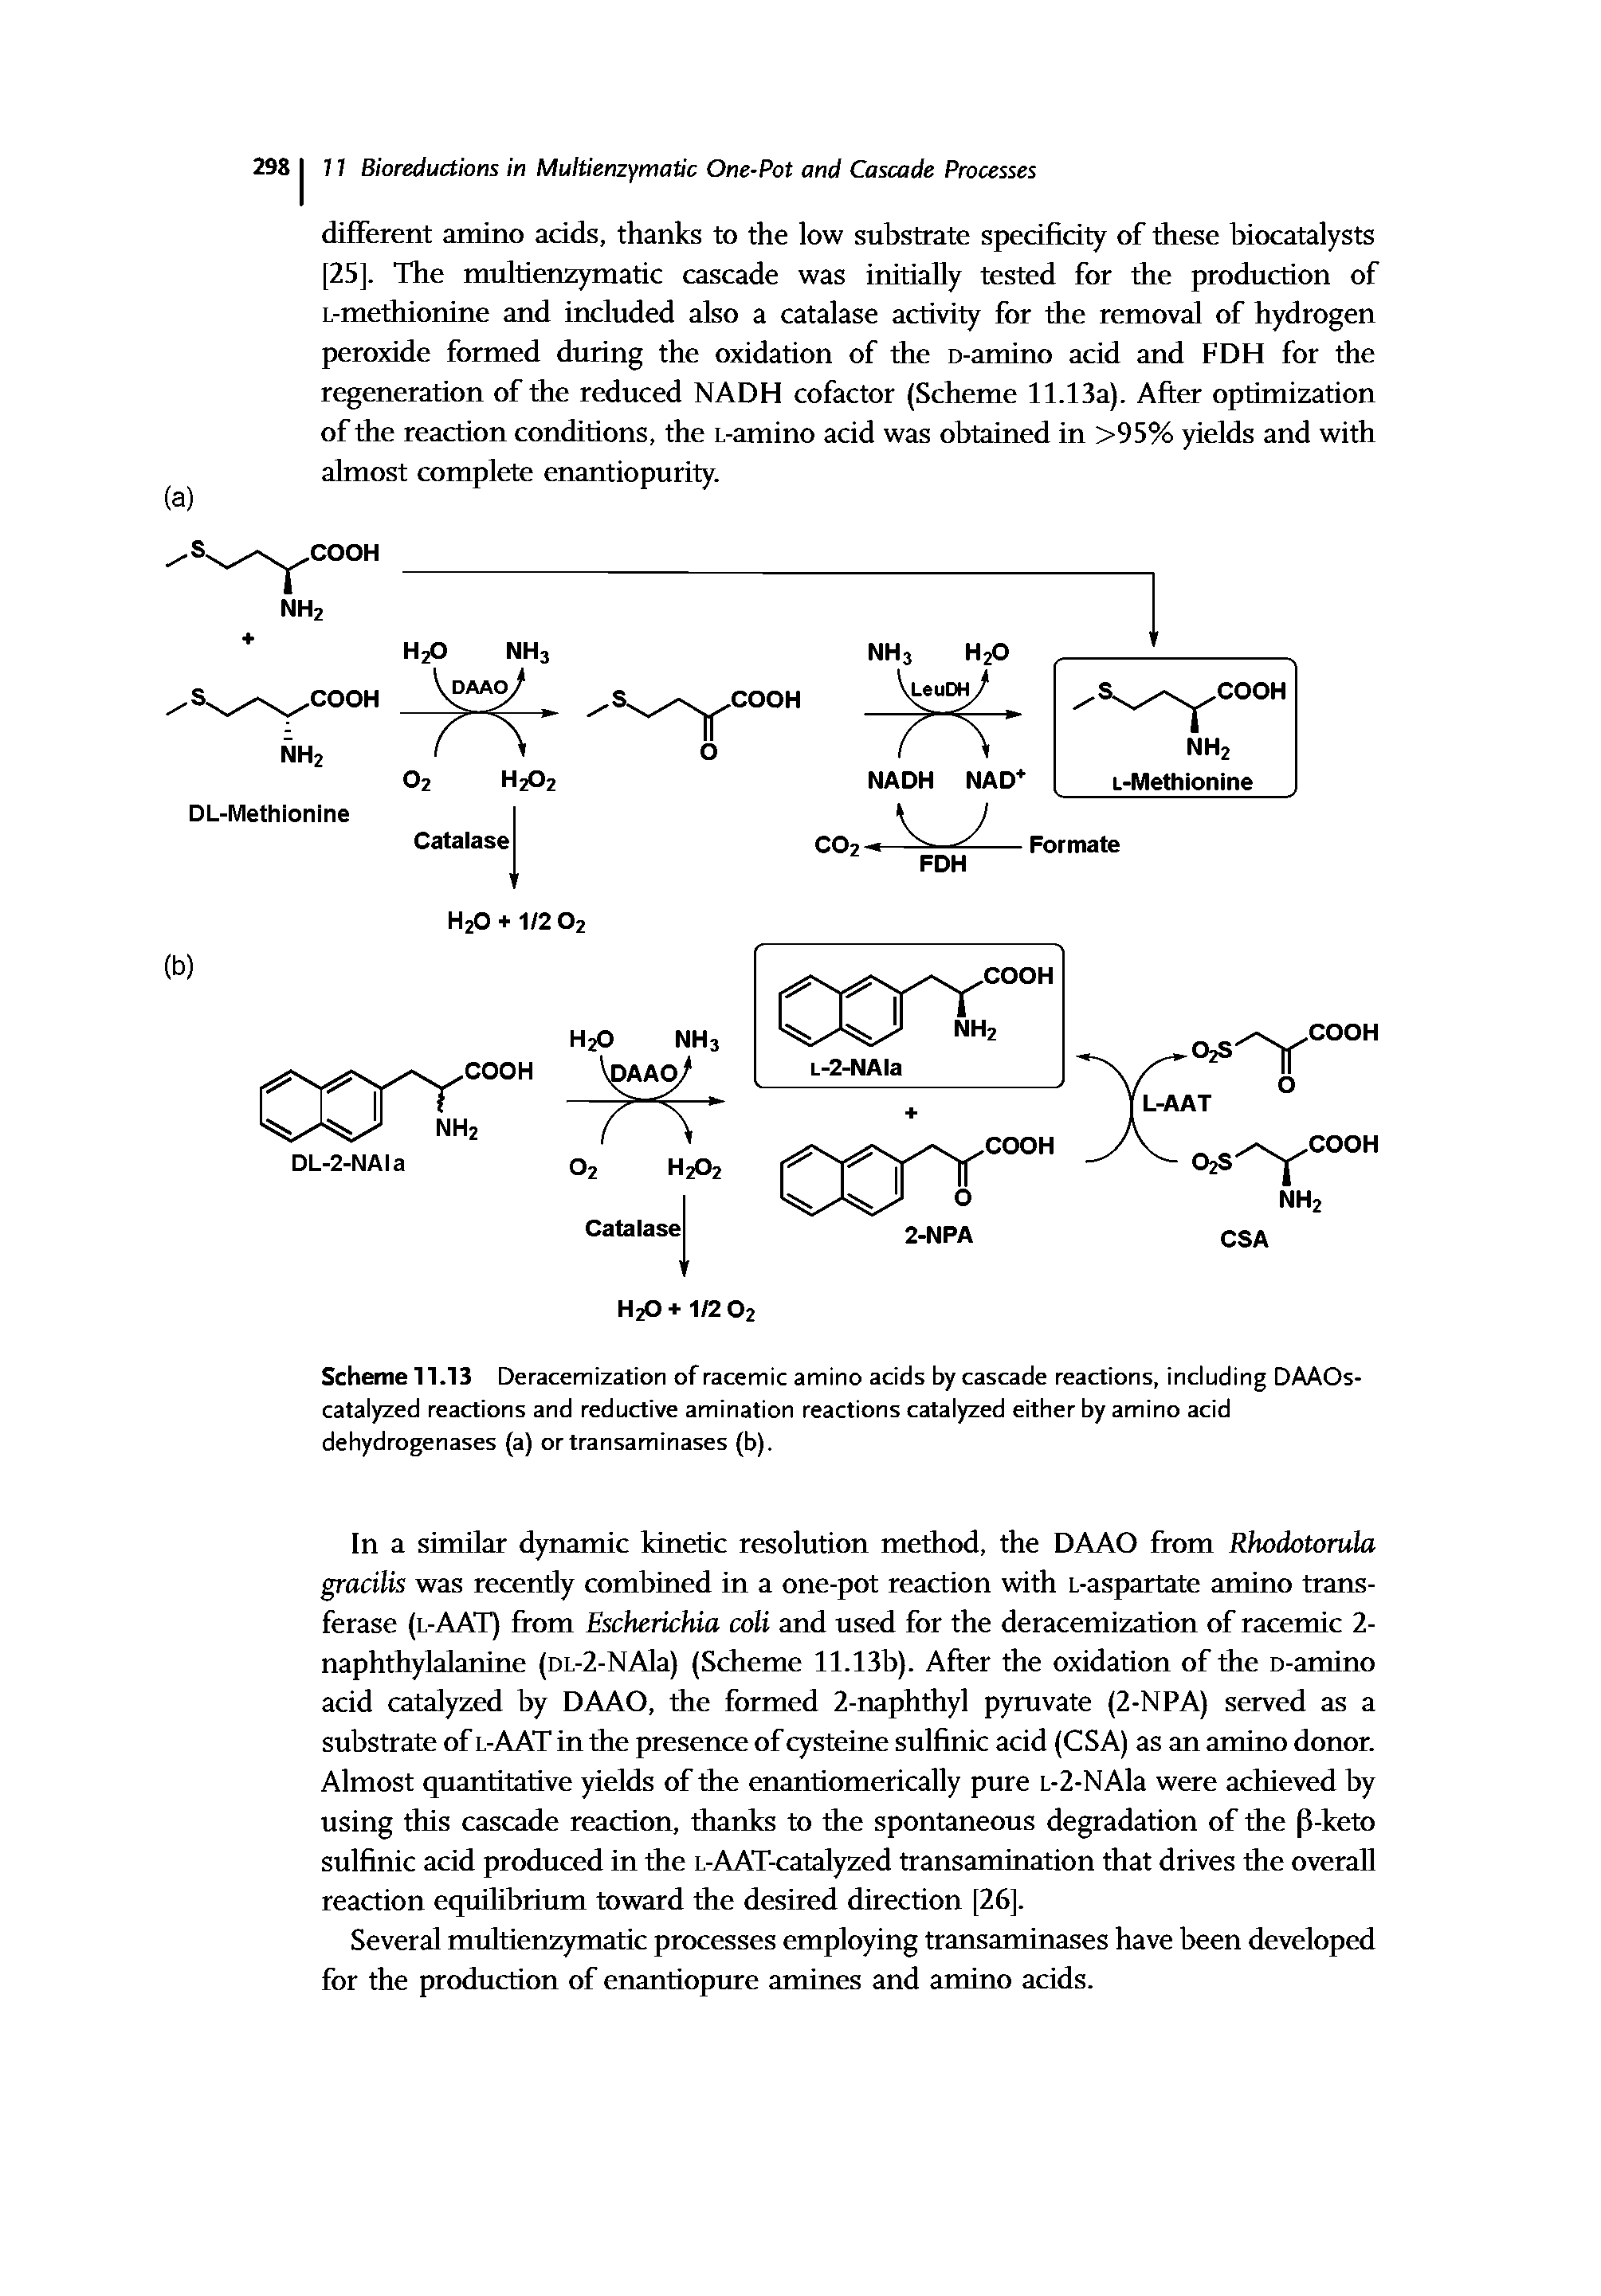 Scheme 11.13 Deracemization of racemic amino acids by cascade reactions, including DAAOs-catalyzed reactions and reductive amination reactions catalyzed either by amino acid dehydrogenases (a) or transaminases (b).